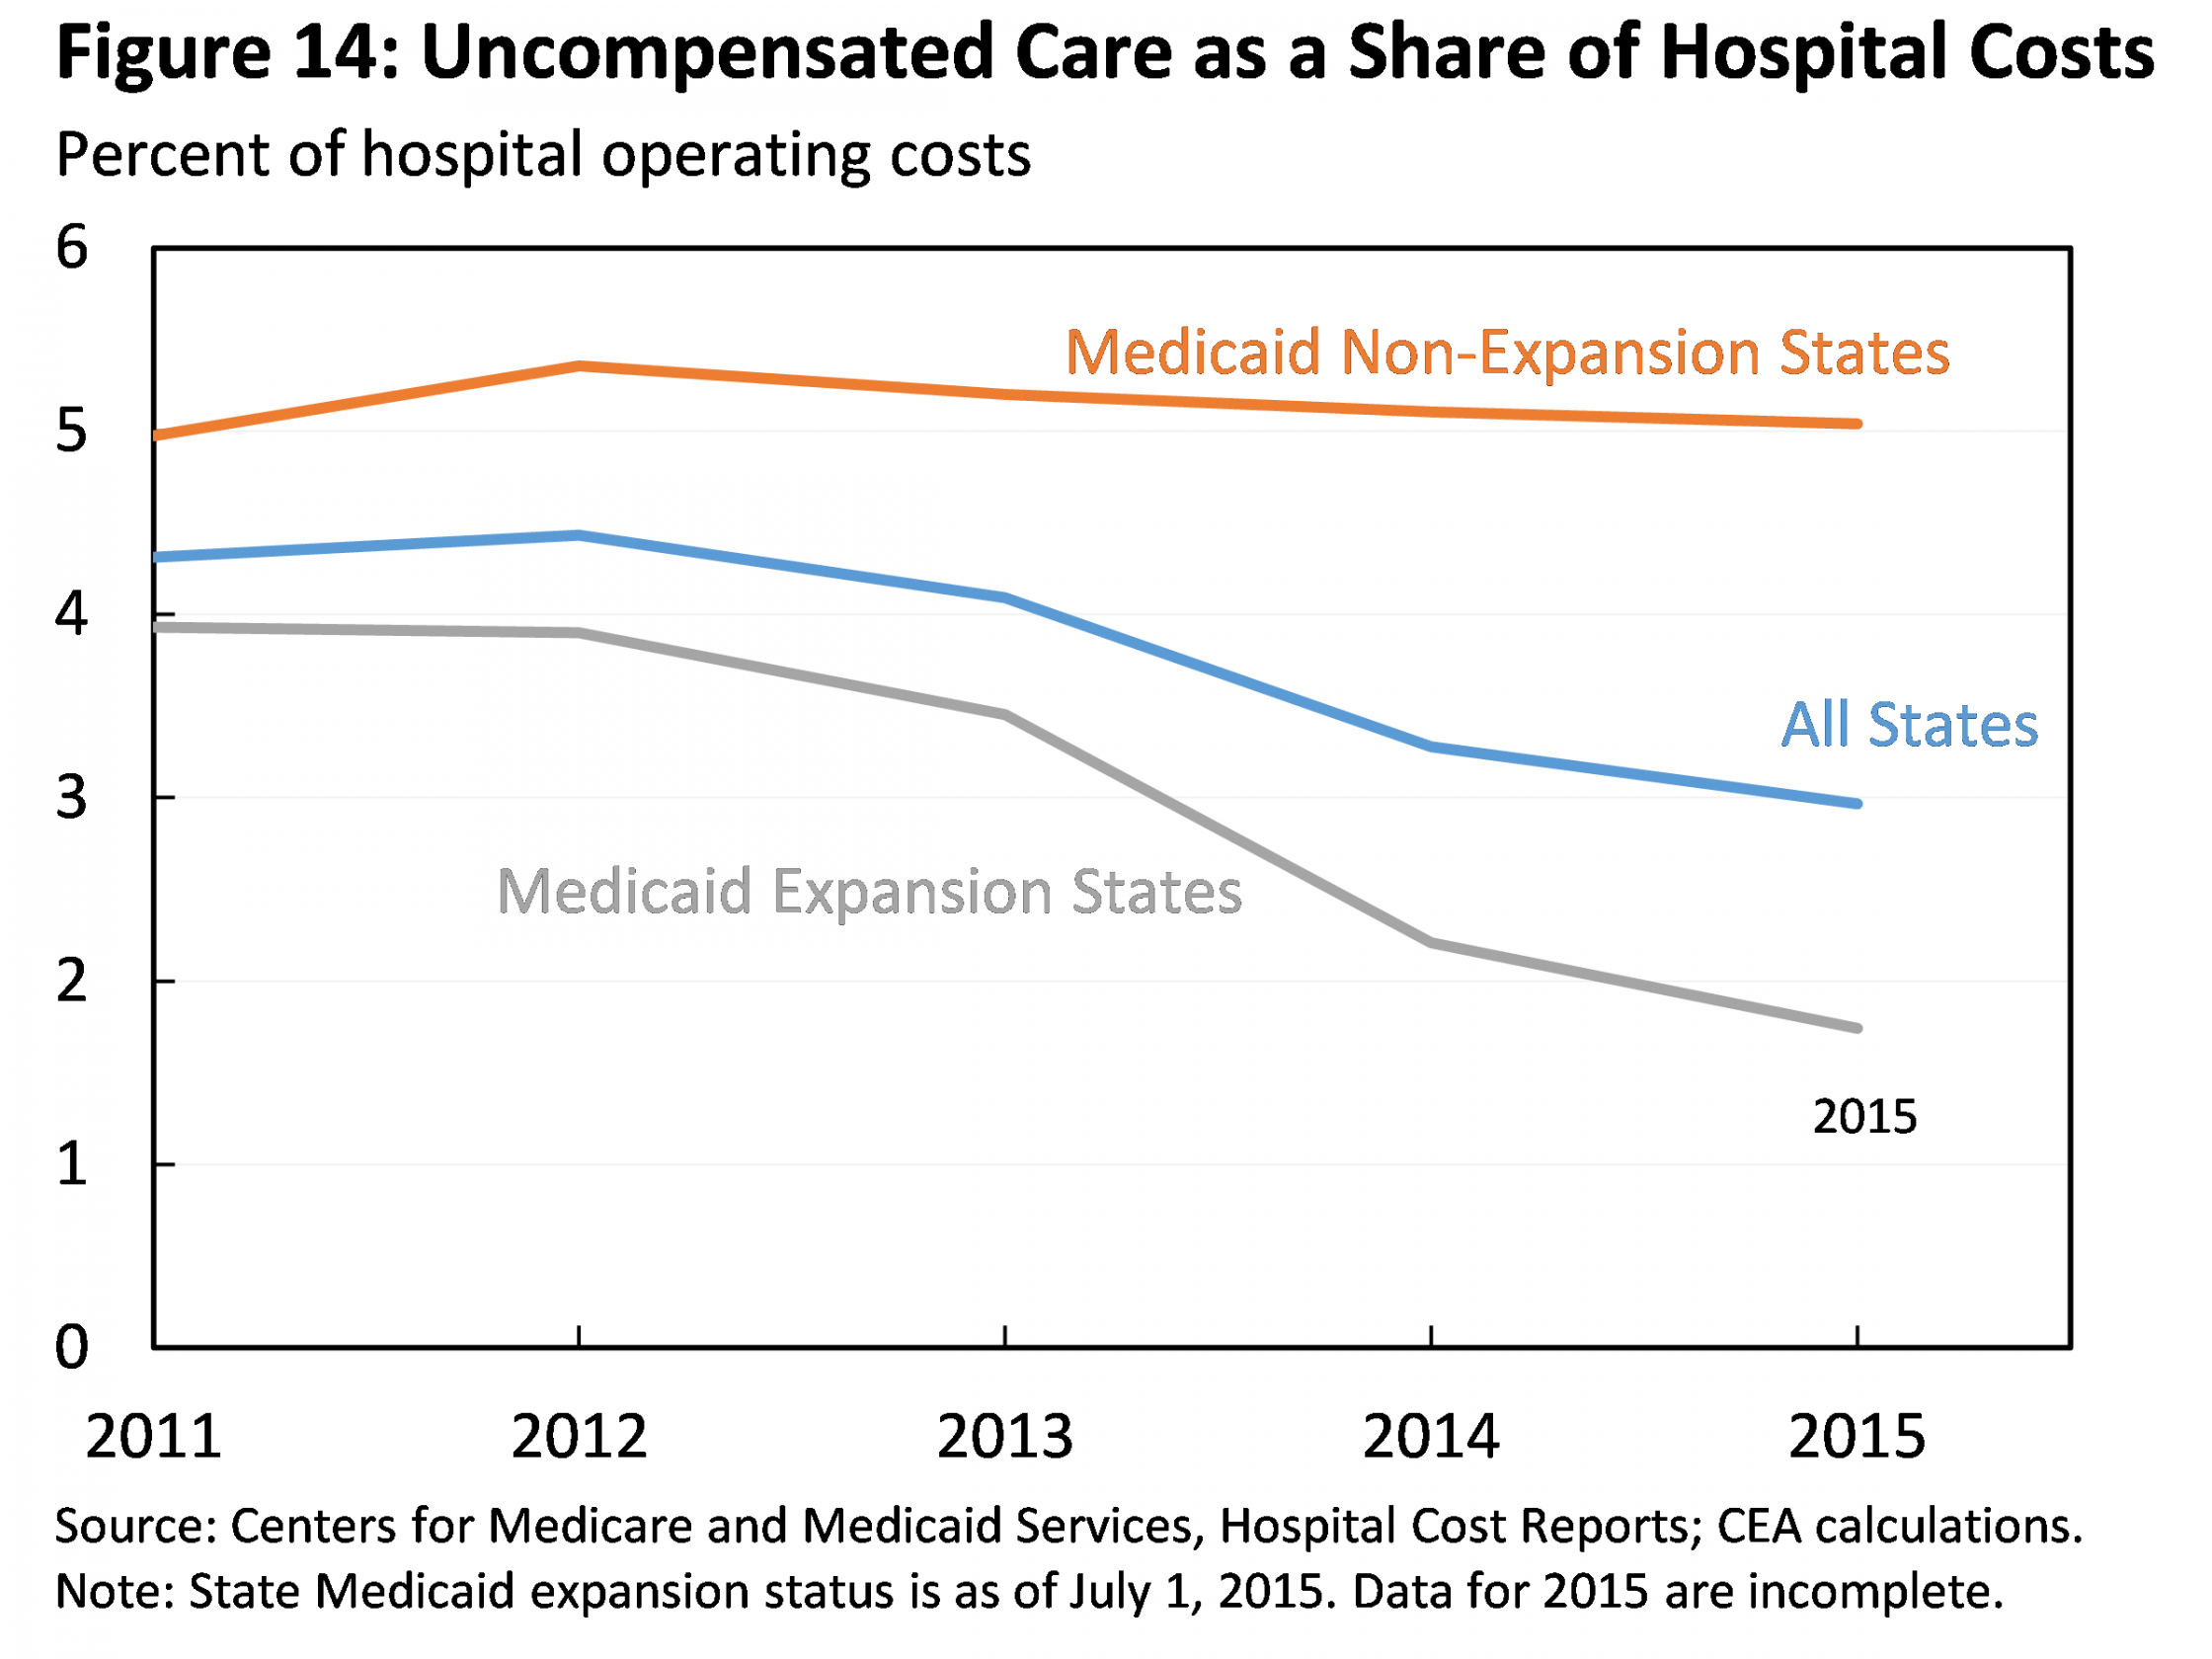 Uncompensated Care as a Share of Hospital Costs